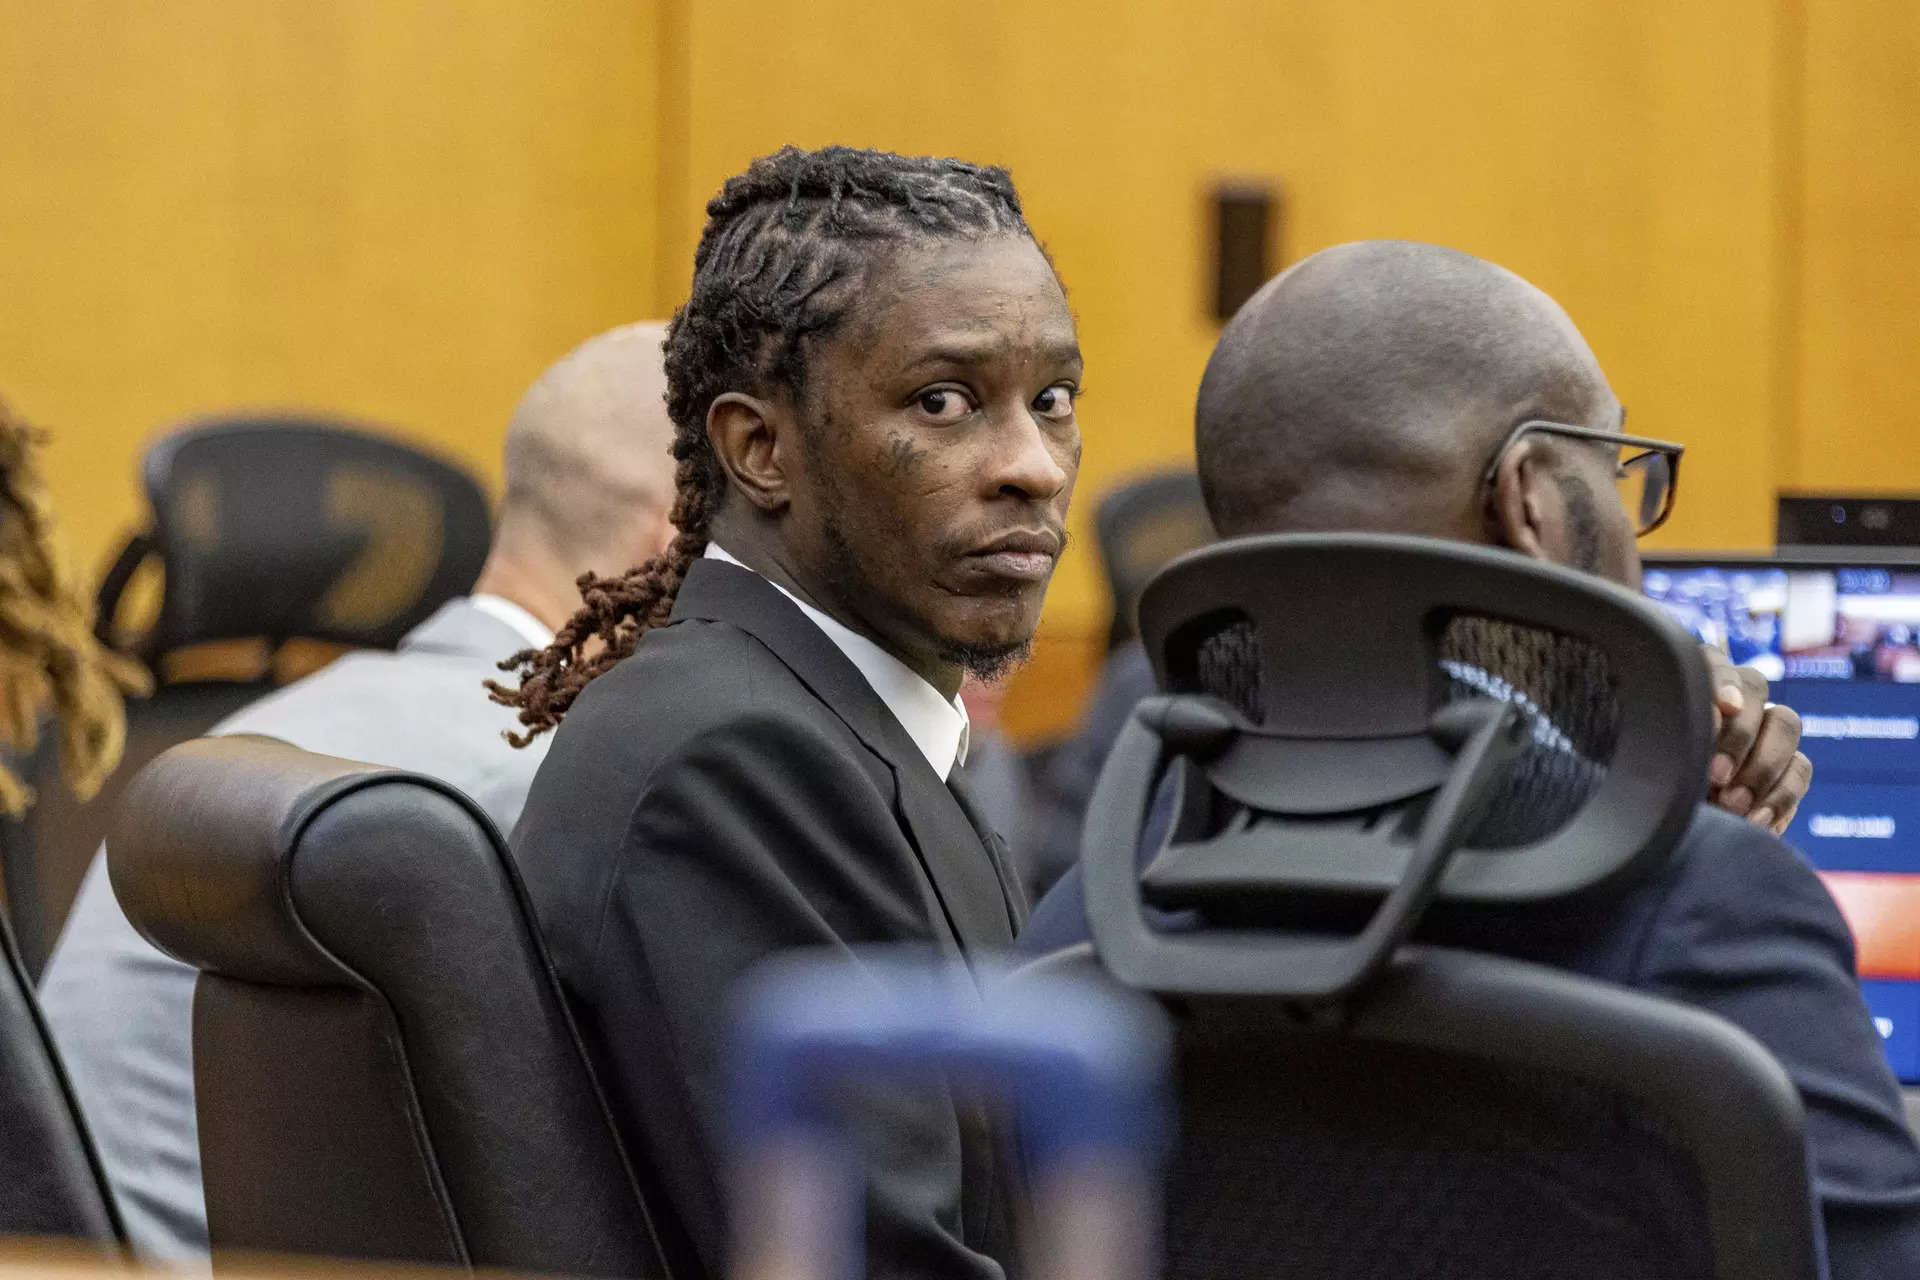 Rapper Young Thug's trial postponed after co-defendant stabbed in Atlanta jail 